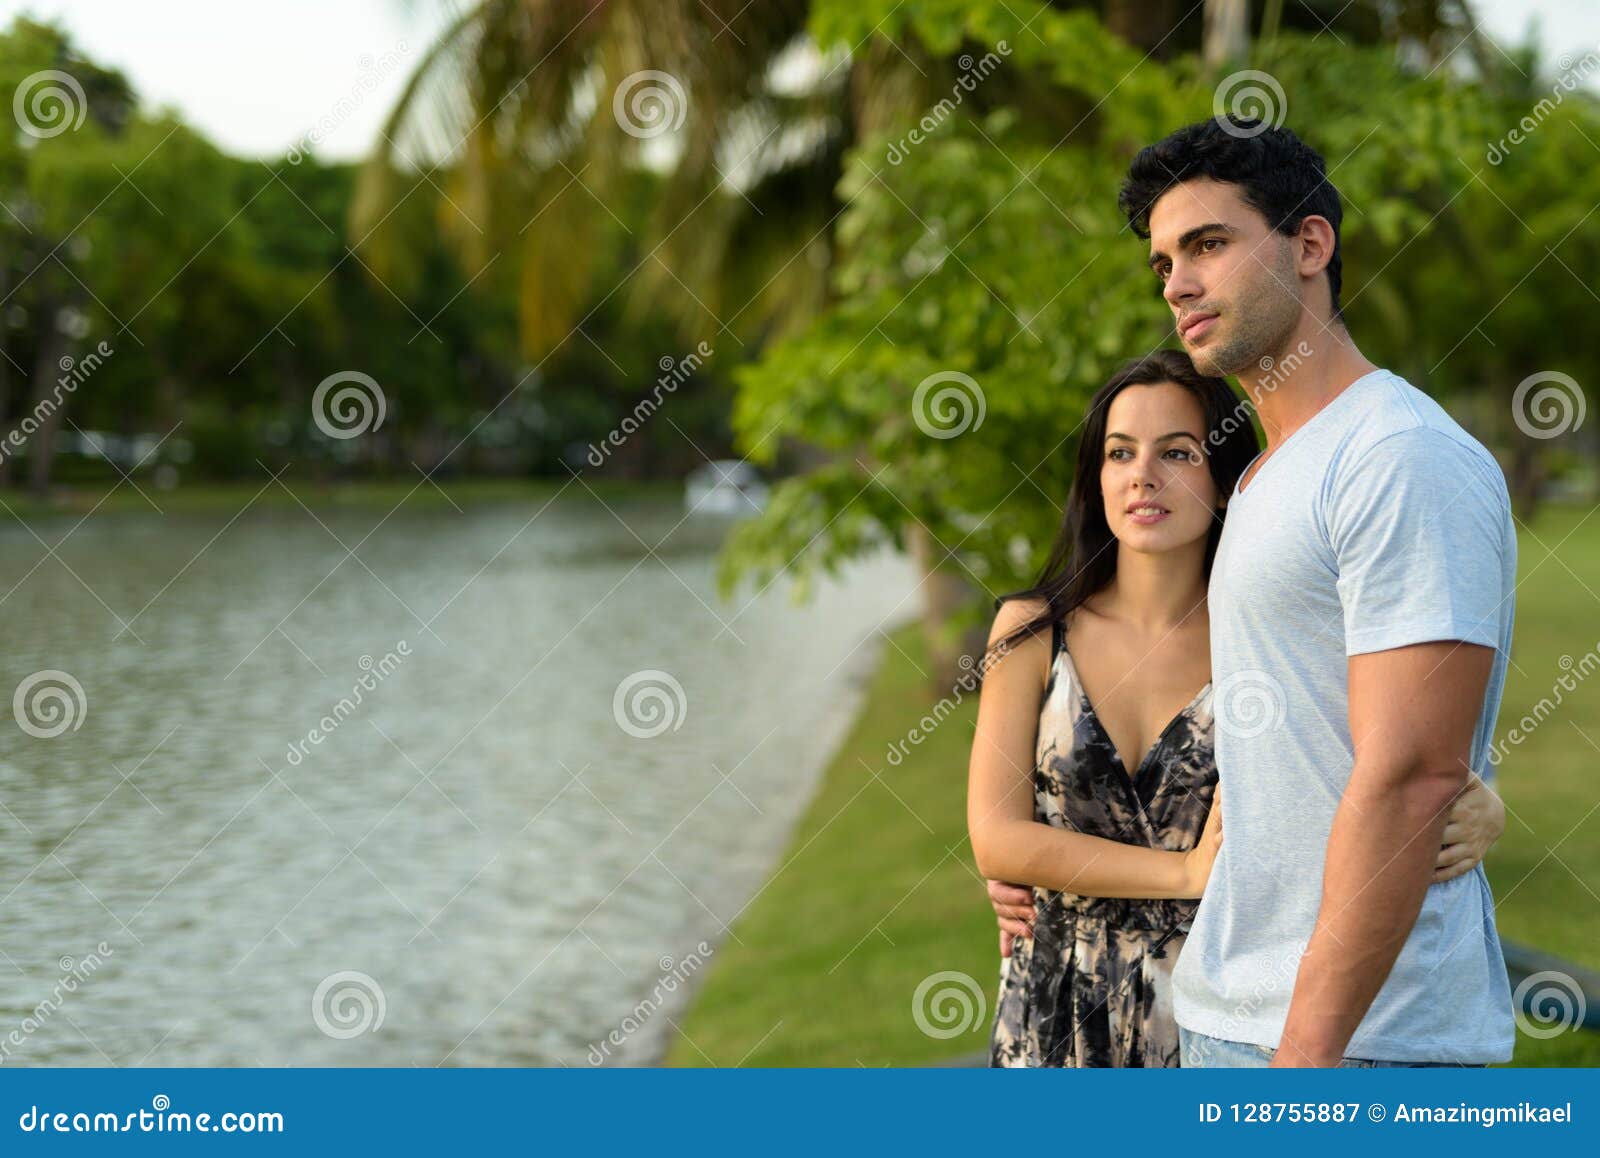 Young Hispanic Couple Relaxing In The Park Together Stock Image Image